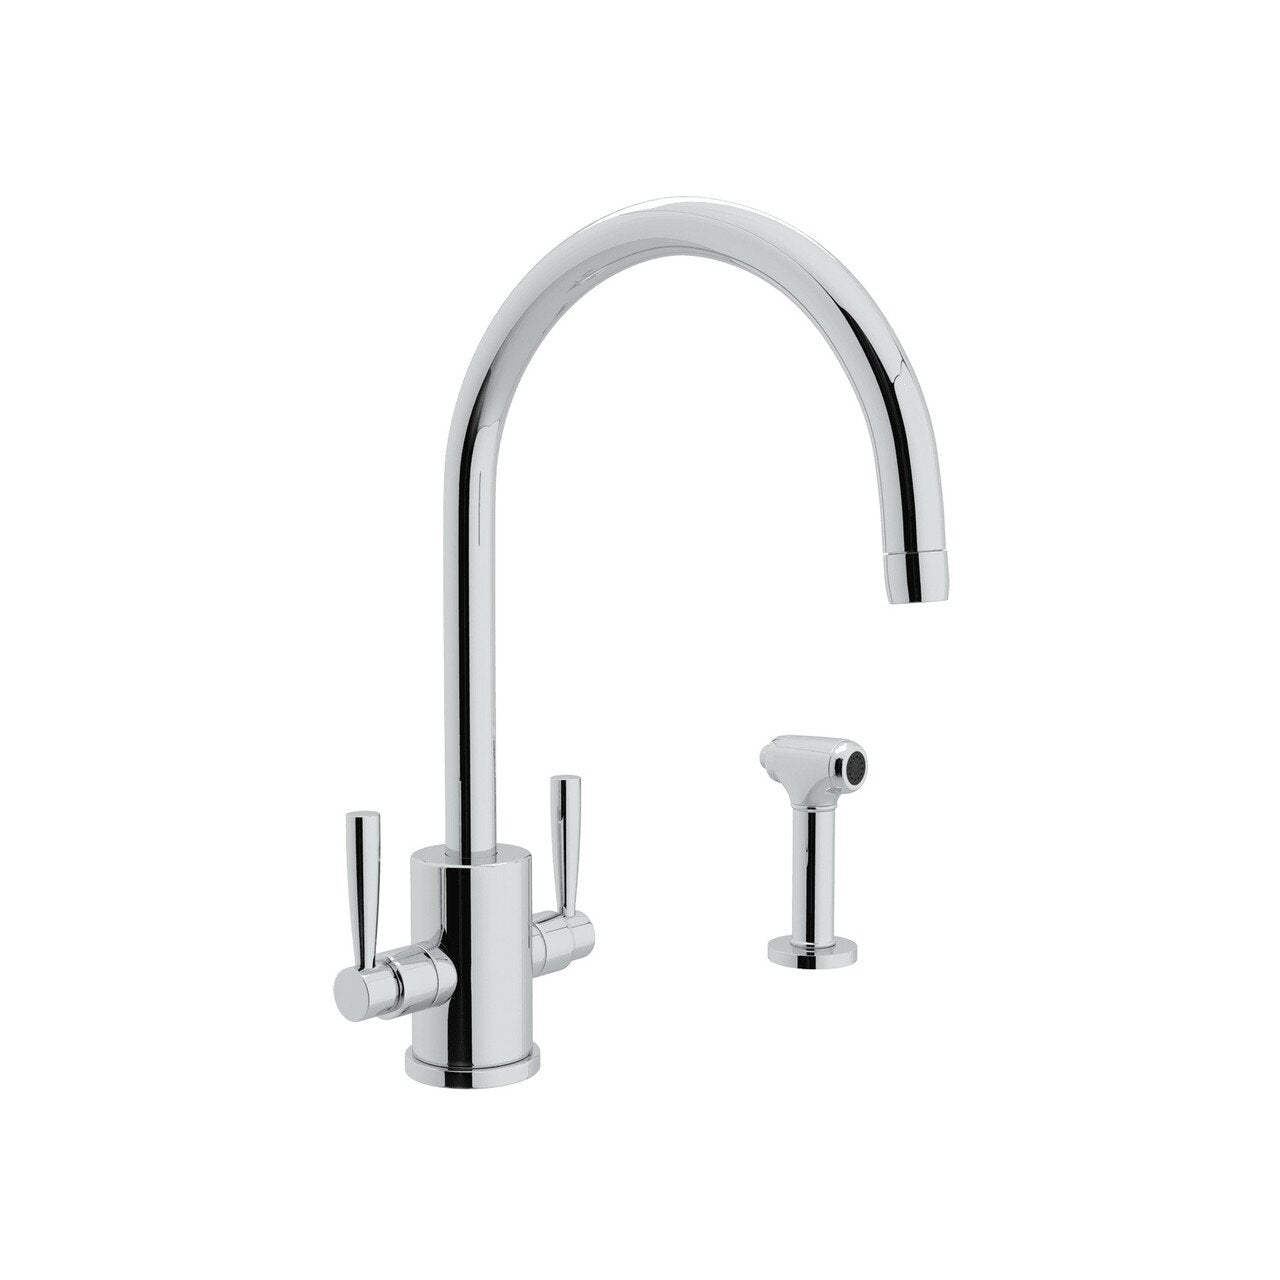 Perrin & Rowe Holborn Single Hole C Spout Kitchen Faucet with Round Body and Sidespray - BNGBath